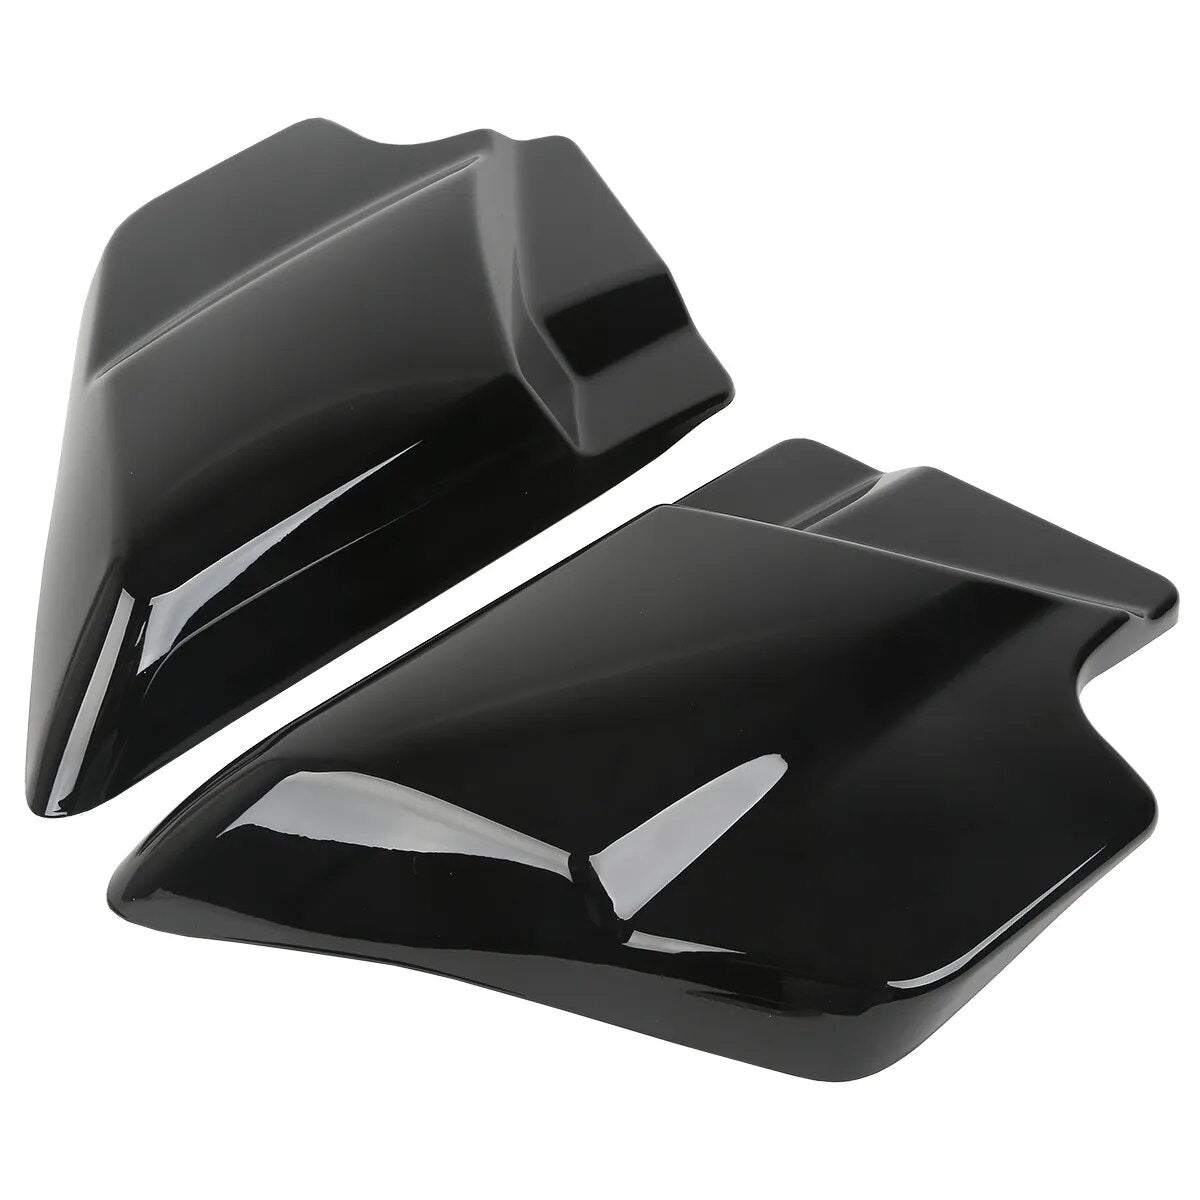 Voodoo Cycle House Side Covers For Harley-Davidson Touring Models Street Electra Glide Road King CVO 2009-UP